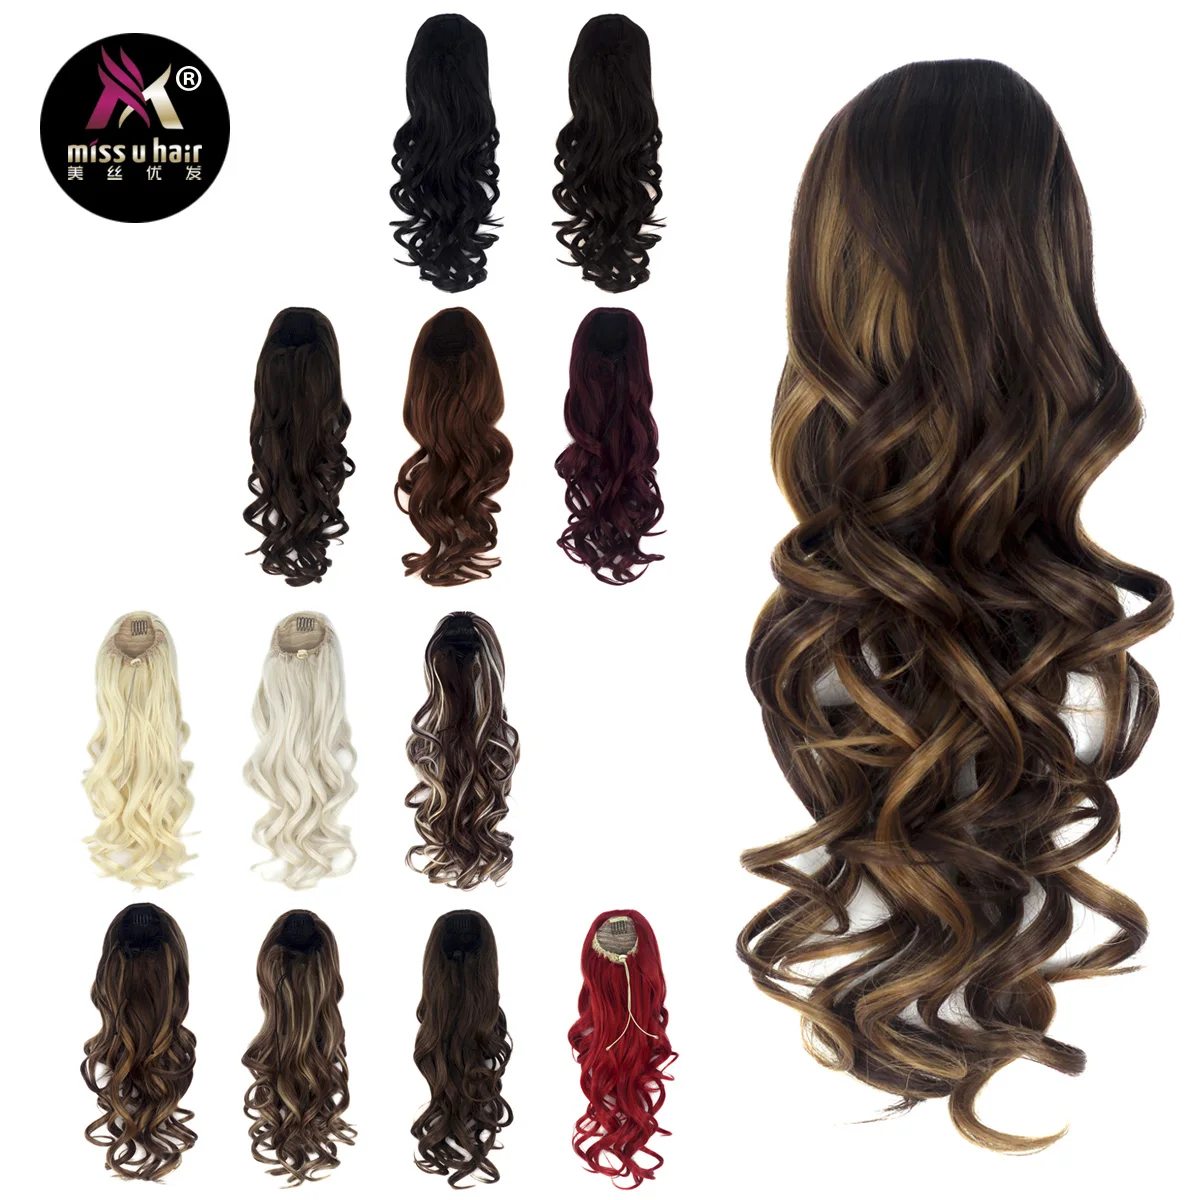 

Miss U Hair 20" 50cm 150g Women Long Curly Ponytails Clip In On Hair Extension Pieces Accessories for Halloween